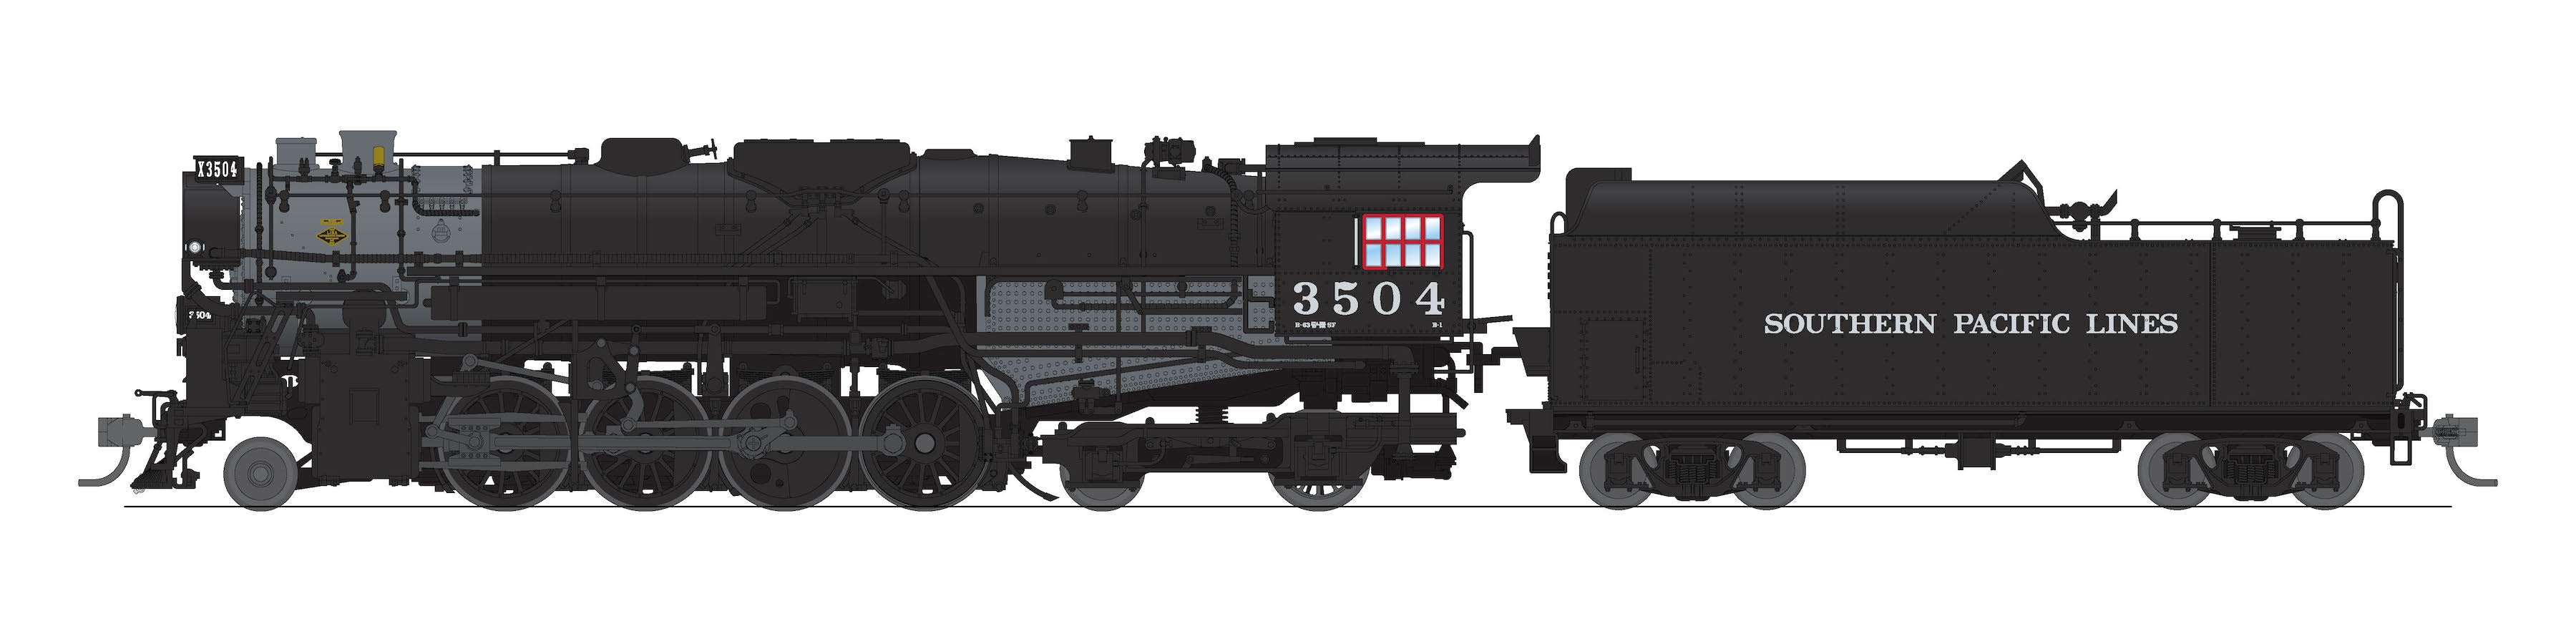 7905 Southern Pacific 2-8-4 Berkshire, T1a #3504, 4-axle Tender, No-Sound / DCC-Ready, HO